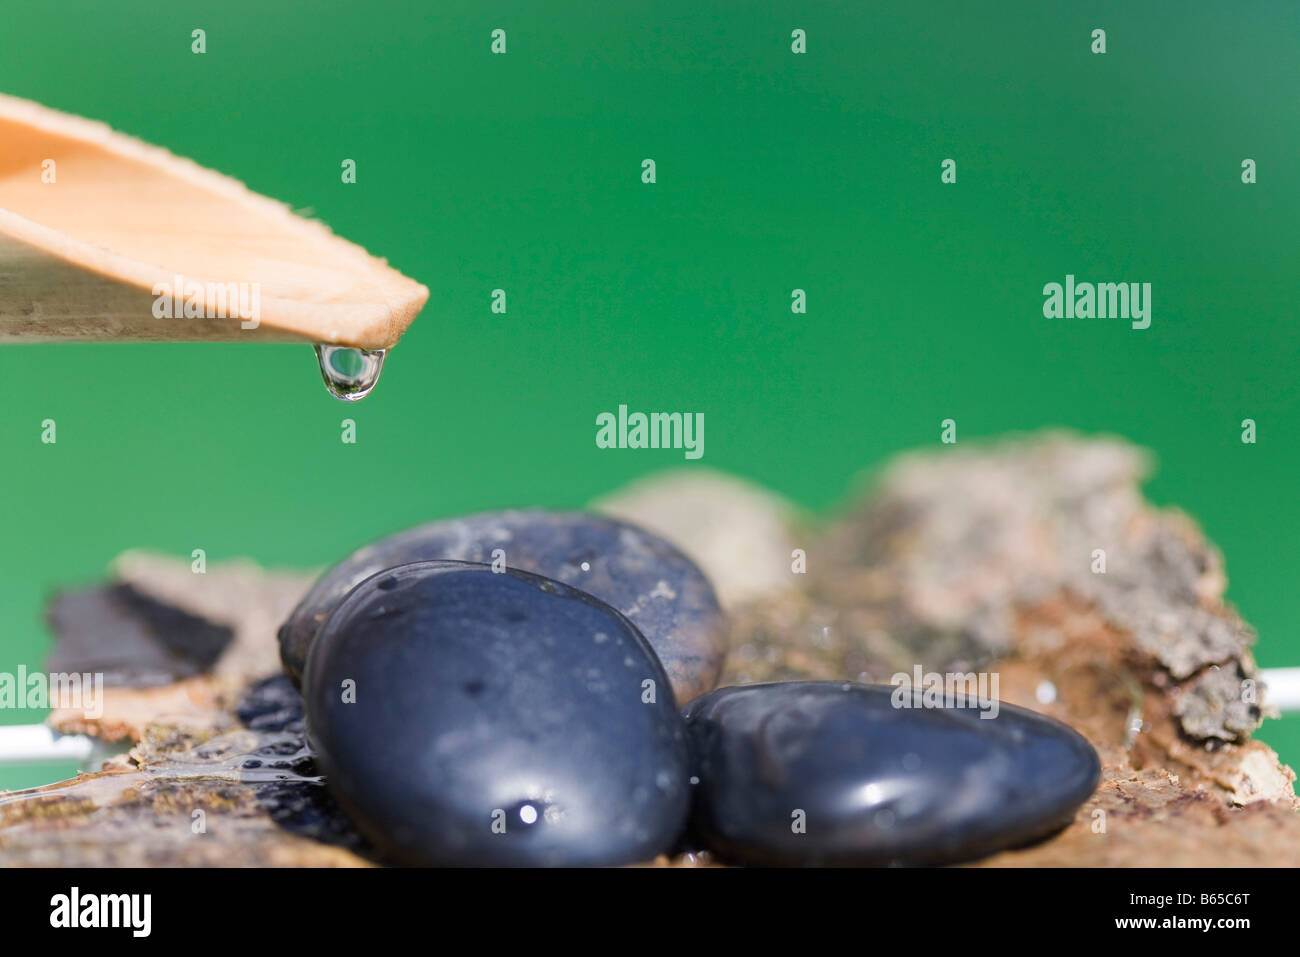 Water droplet hanging off wooden spout over heap of rocks Stock Photo